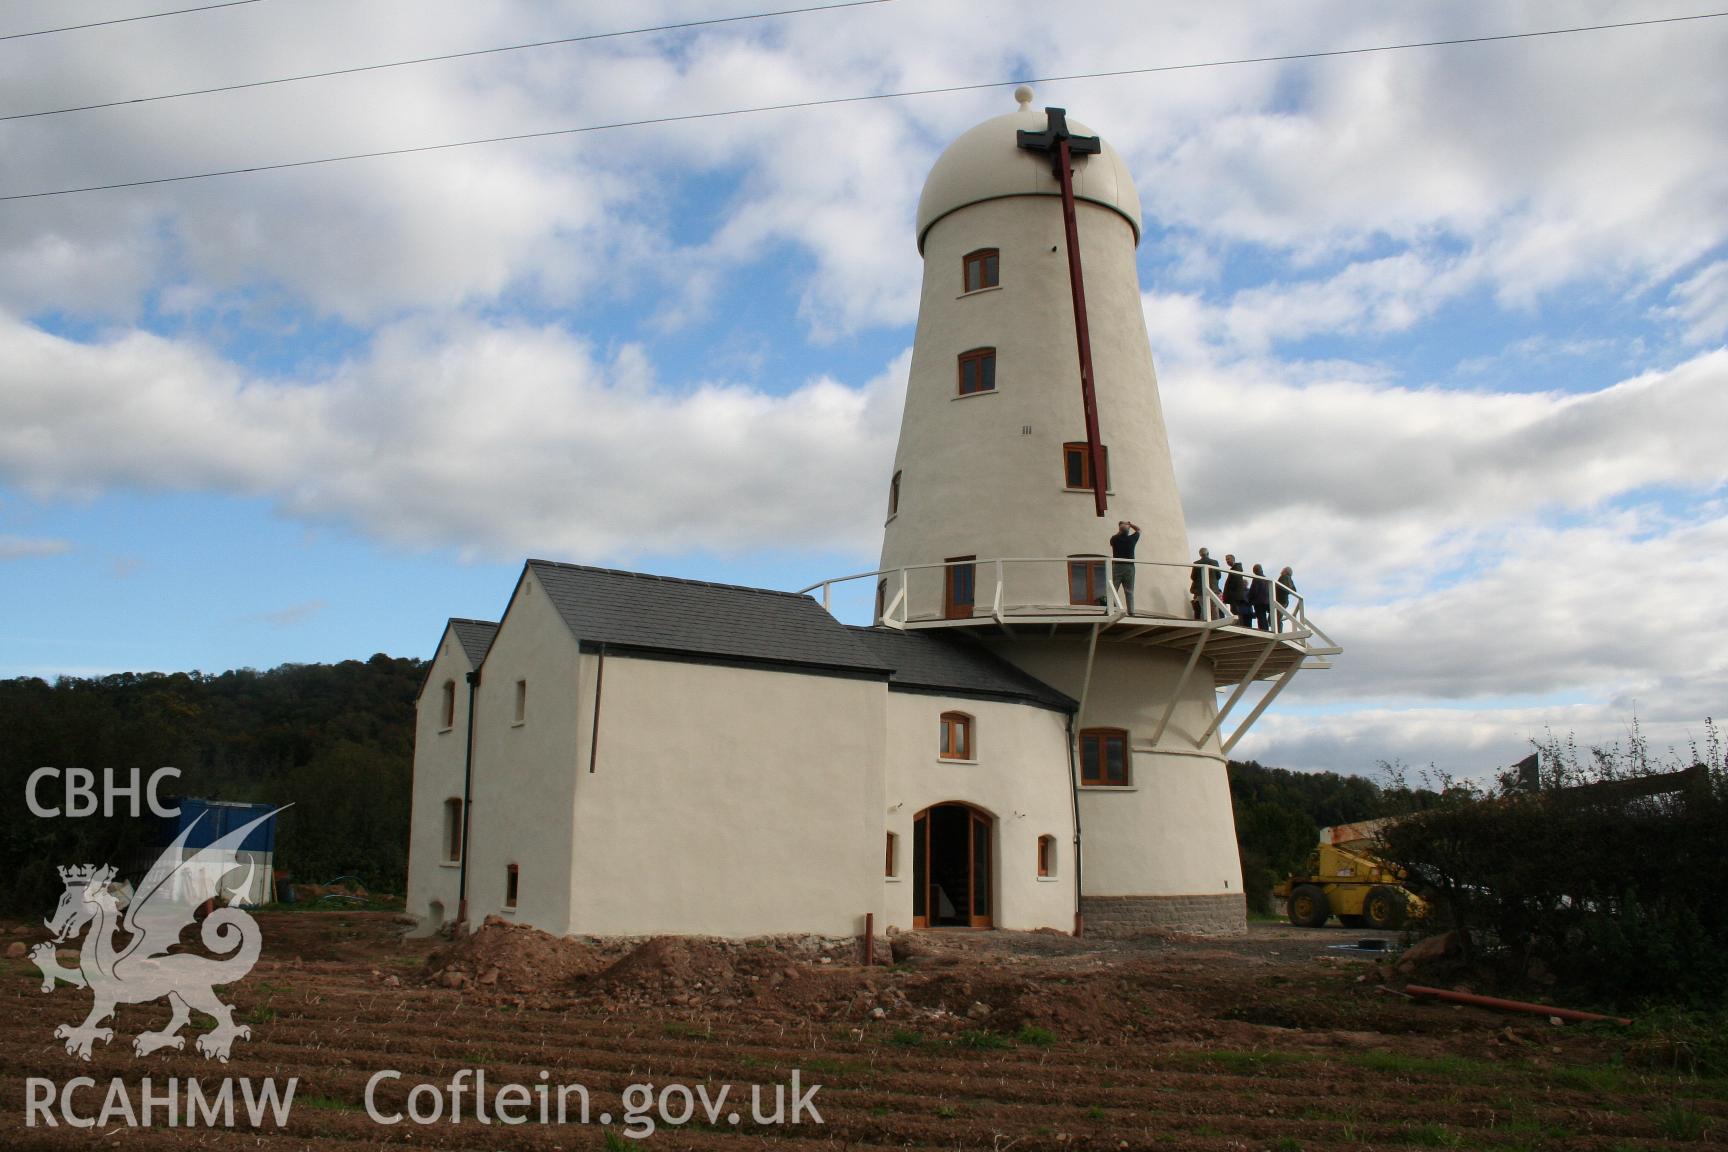 View of Llancayo Windmill from the northwest, taken by Brian Malaws on 18 October 2008.